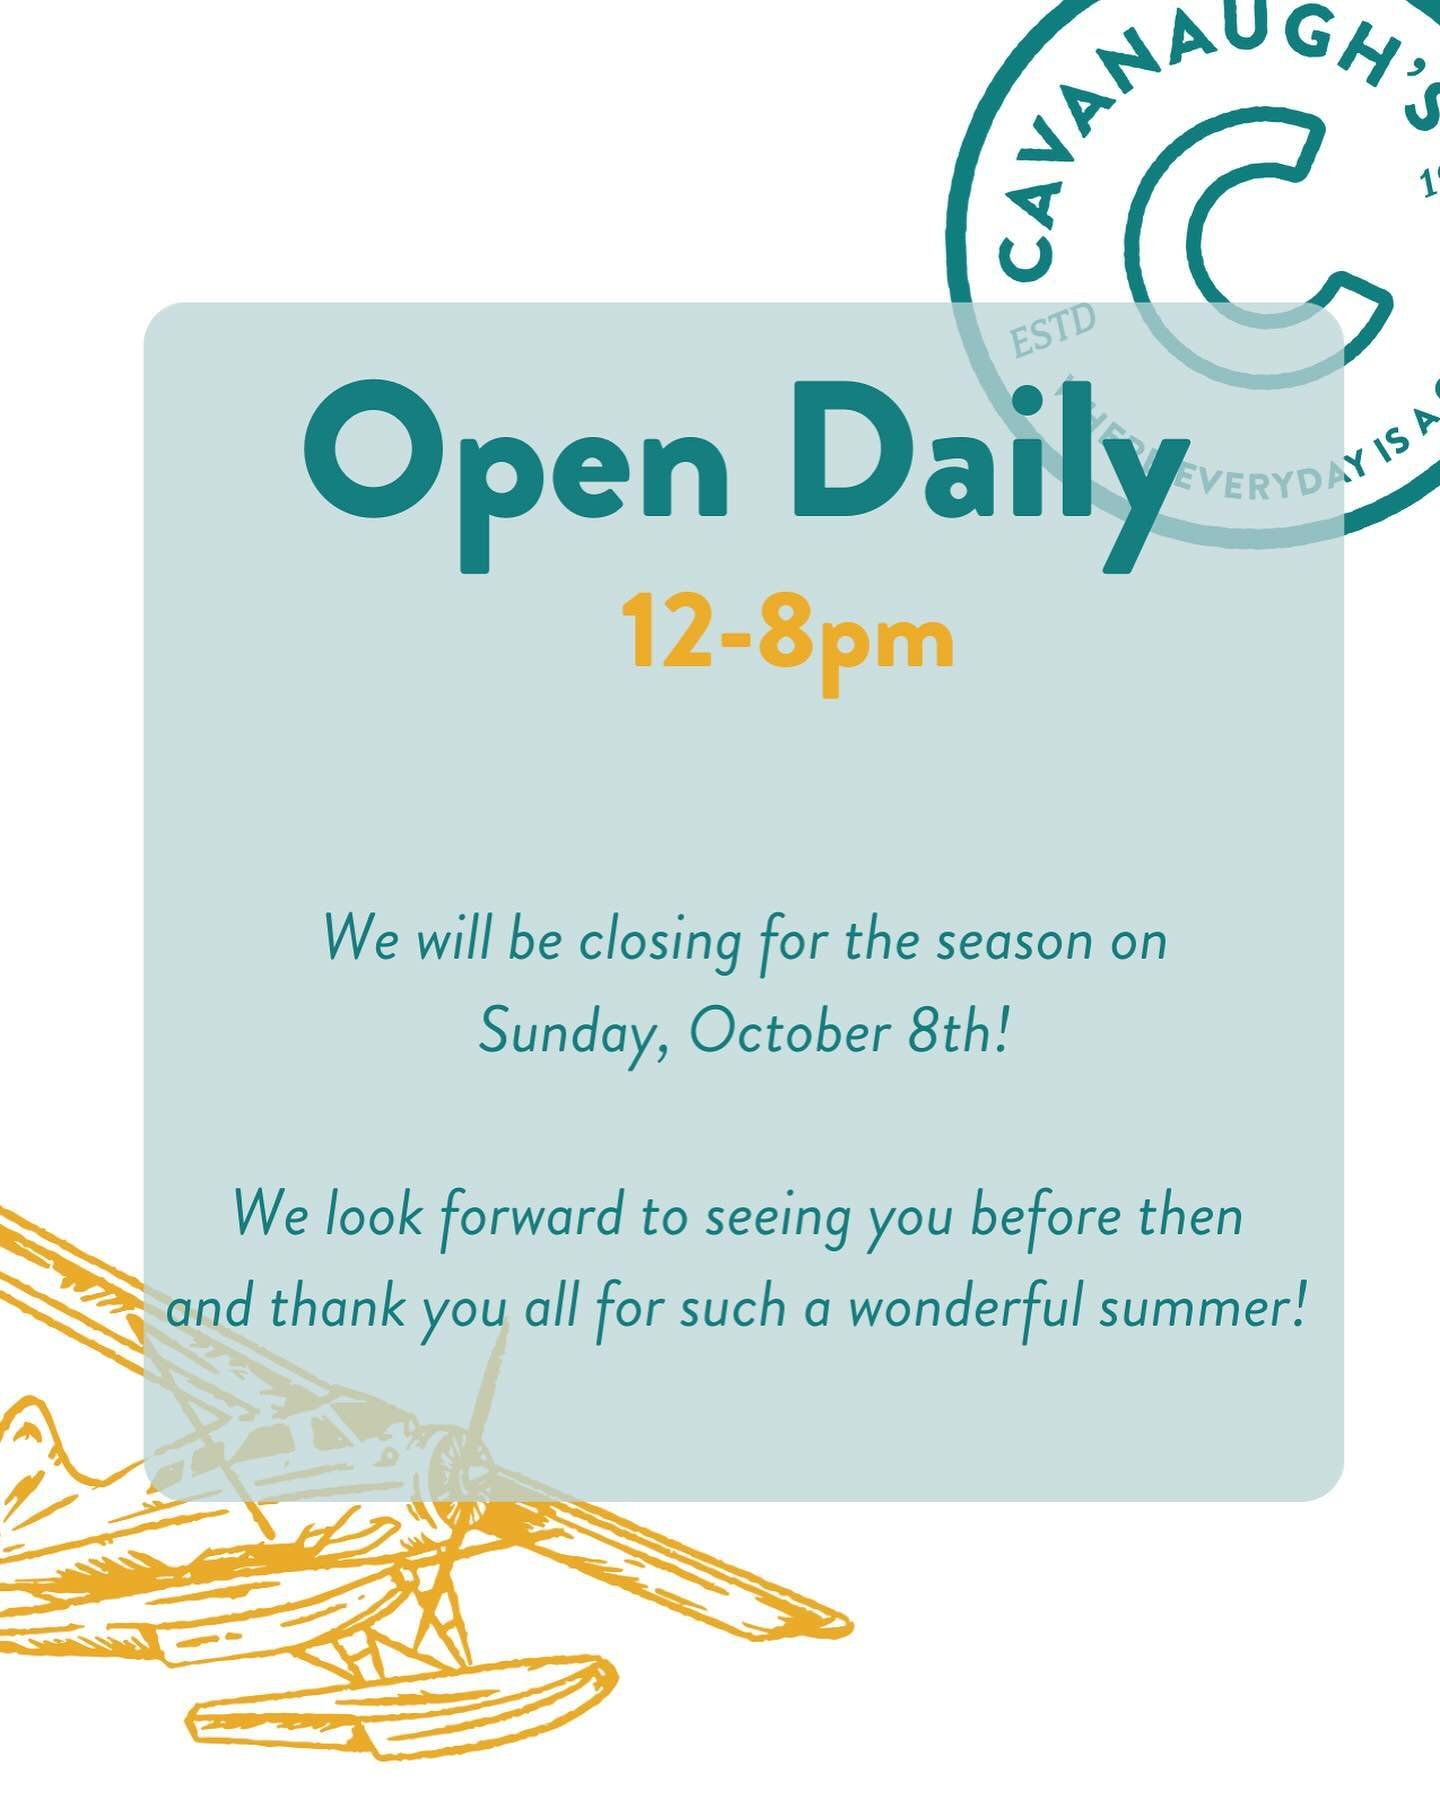 We&rsquo;re rounding the corner on our final two weeks of the season! We are open daily 12-8pm until we shut down for winter on October 8th. 

We want to extend our sincerest gratitude to all of you who visited this summer! We are thrilled to be back